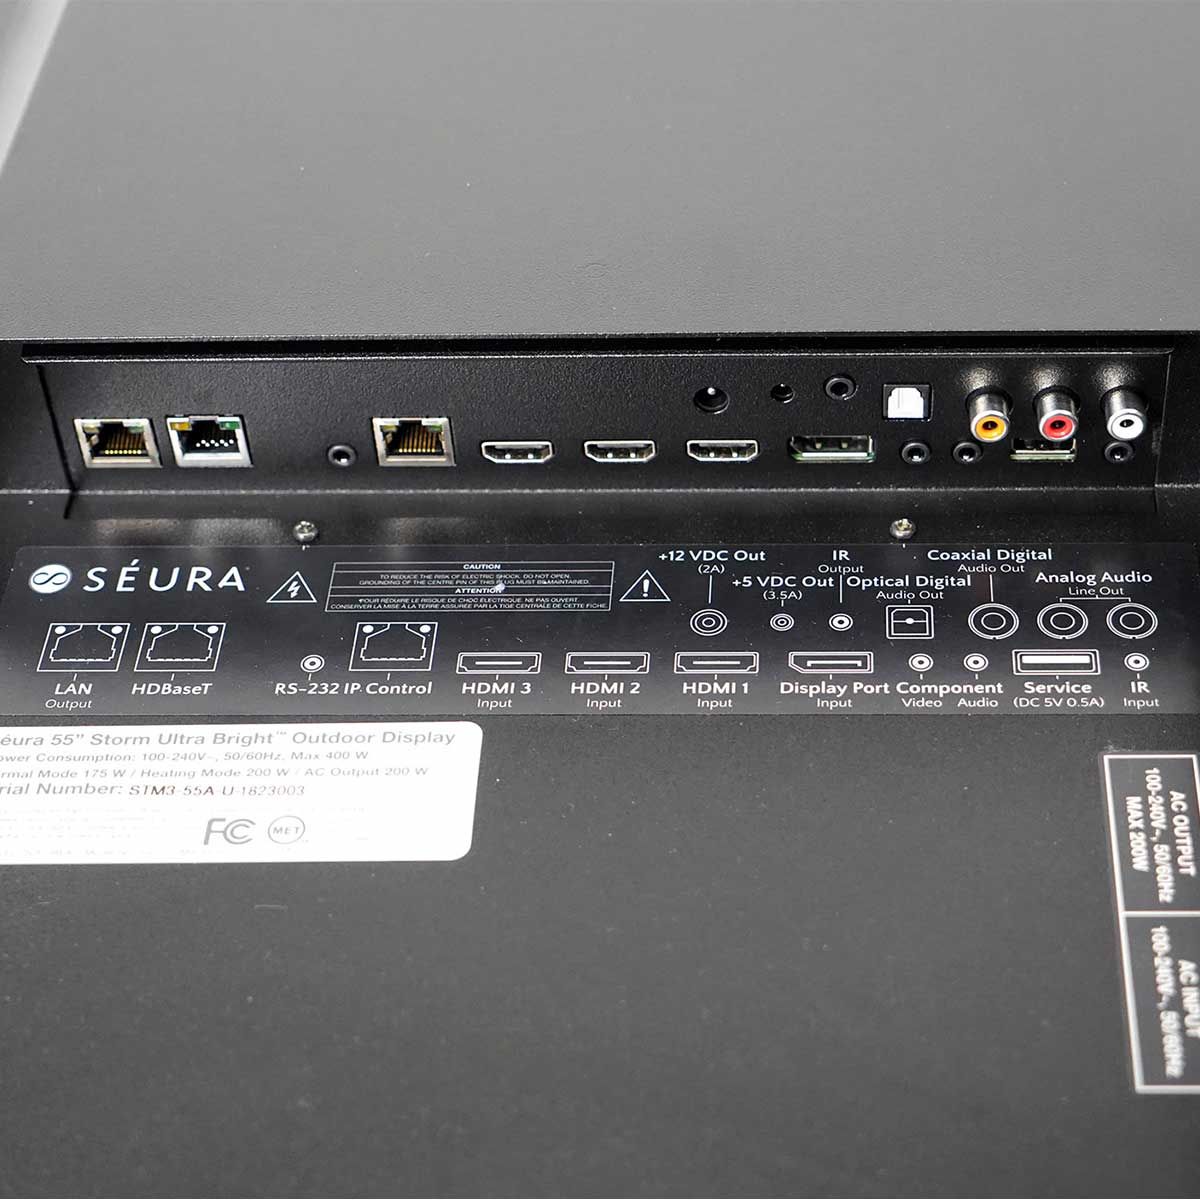 Seura Ultra Bright Outdoor 4K UHD TV, inputs and outputs